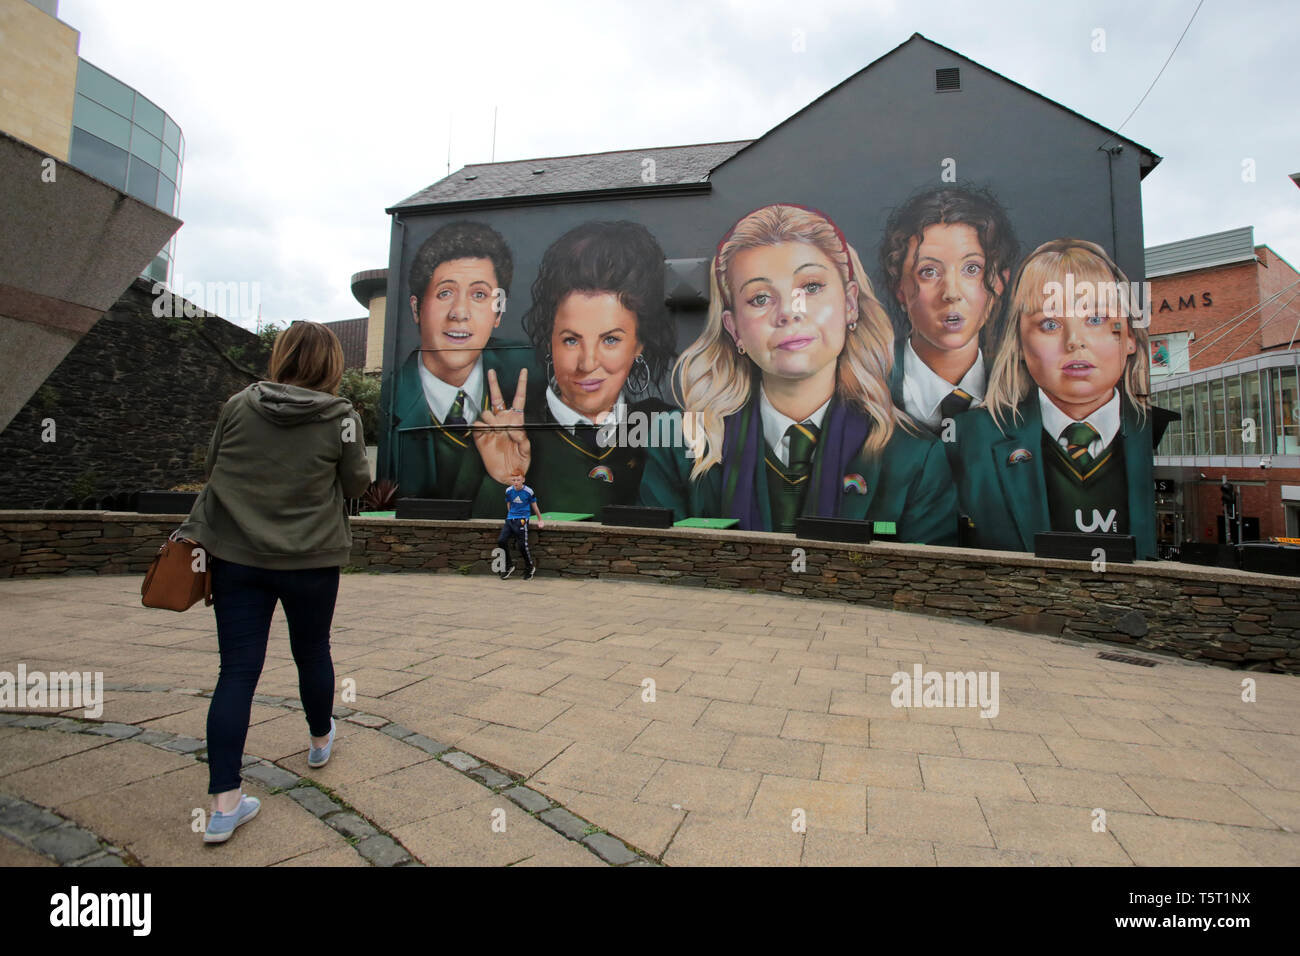 Derry, County Londonderry, Northern Ireland, 25th April, 2019 .A family stops in front of the Channel 4 hit TV show Derry Girls Mural in Derry/Londonderry, Northern Ireland. Derry Girls is a British television sitcom created and written by Lisa McGee. Staring Erin (Saoirse-Monica Jackson), her cousin Orla (Louisa Harland) and their friends Clare (Nicola Coughlan), Michelle (Jamie-Lee O'Donnell) and Michelle's English cousin James (Dylan Llewellyn) navigate their teen years during the Troubles in Derry, where they all attend a Catholic girls' secondary school. Erin lives with her father, Gerry; Stock Photo